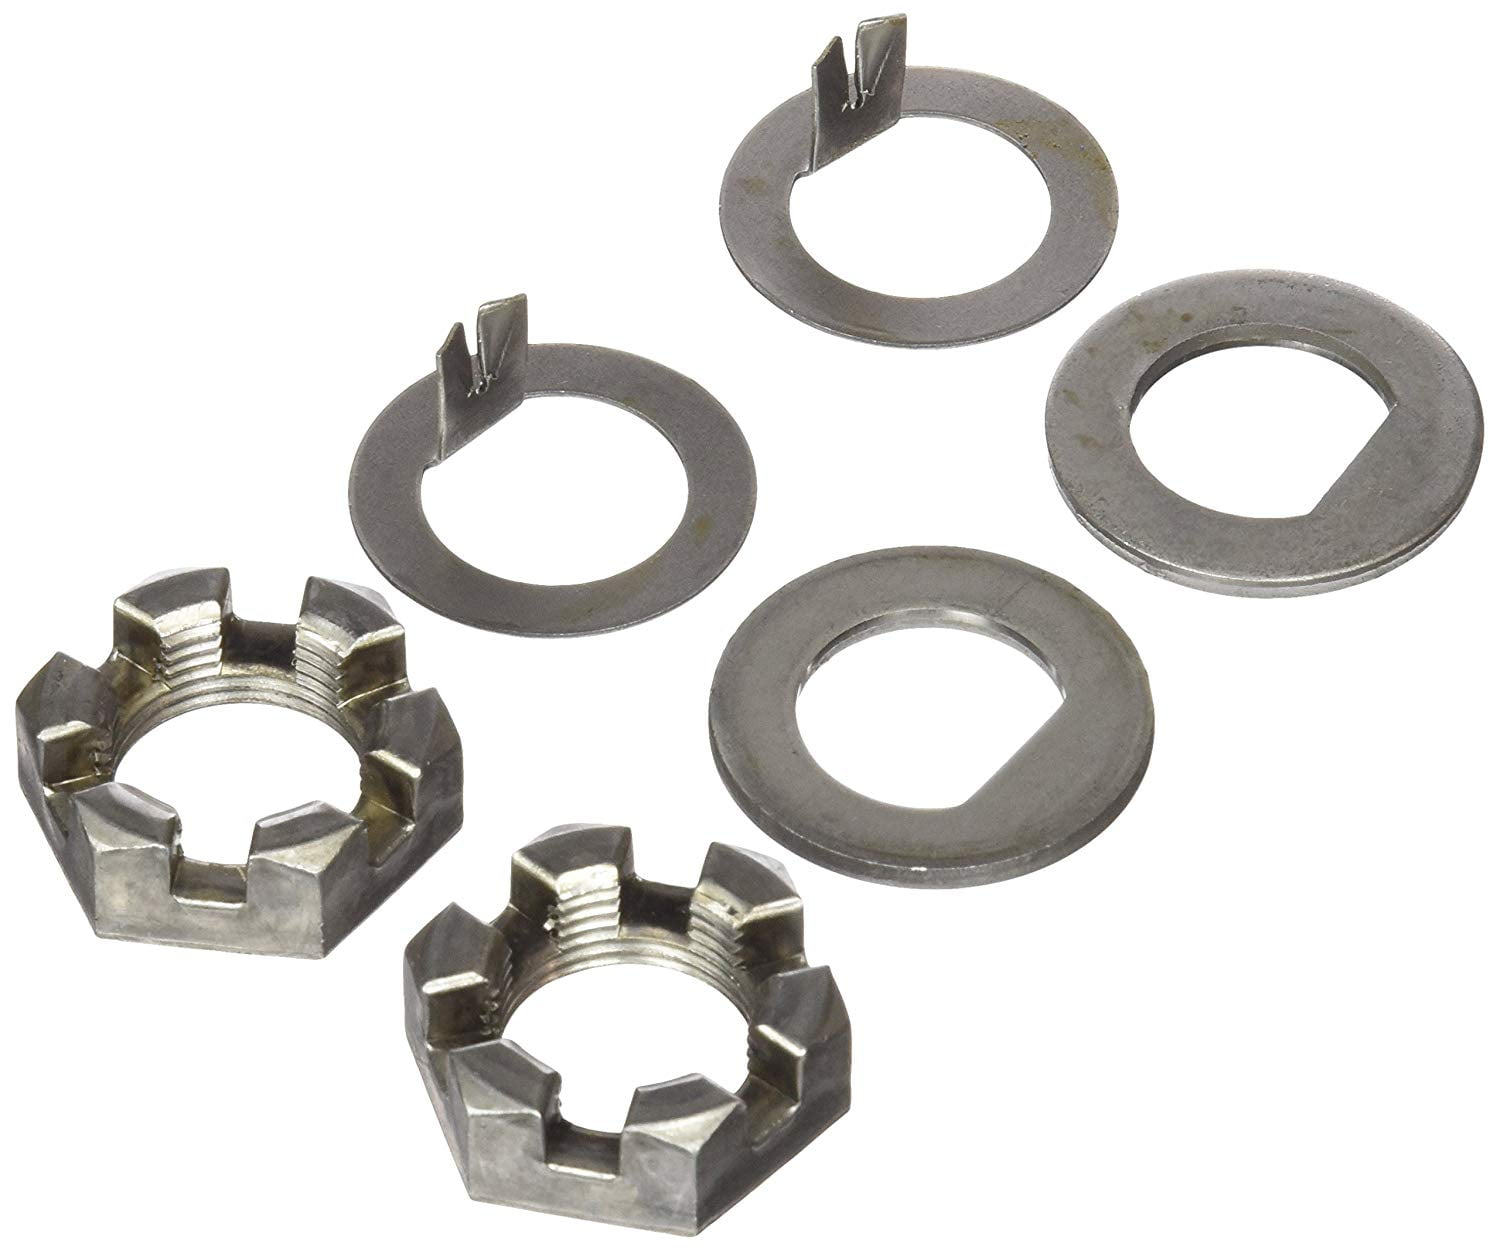 K7133500 Spindle Nut and Washer Kit, Shipping Weight8 ounces, Product